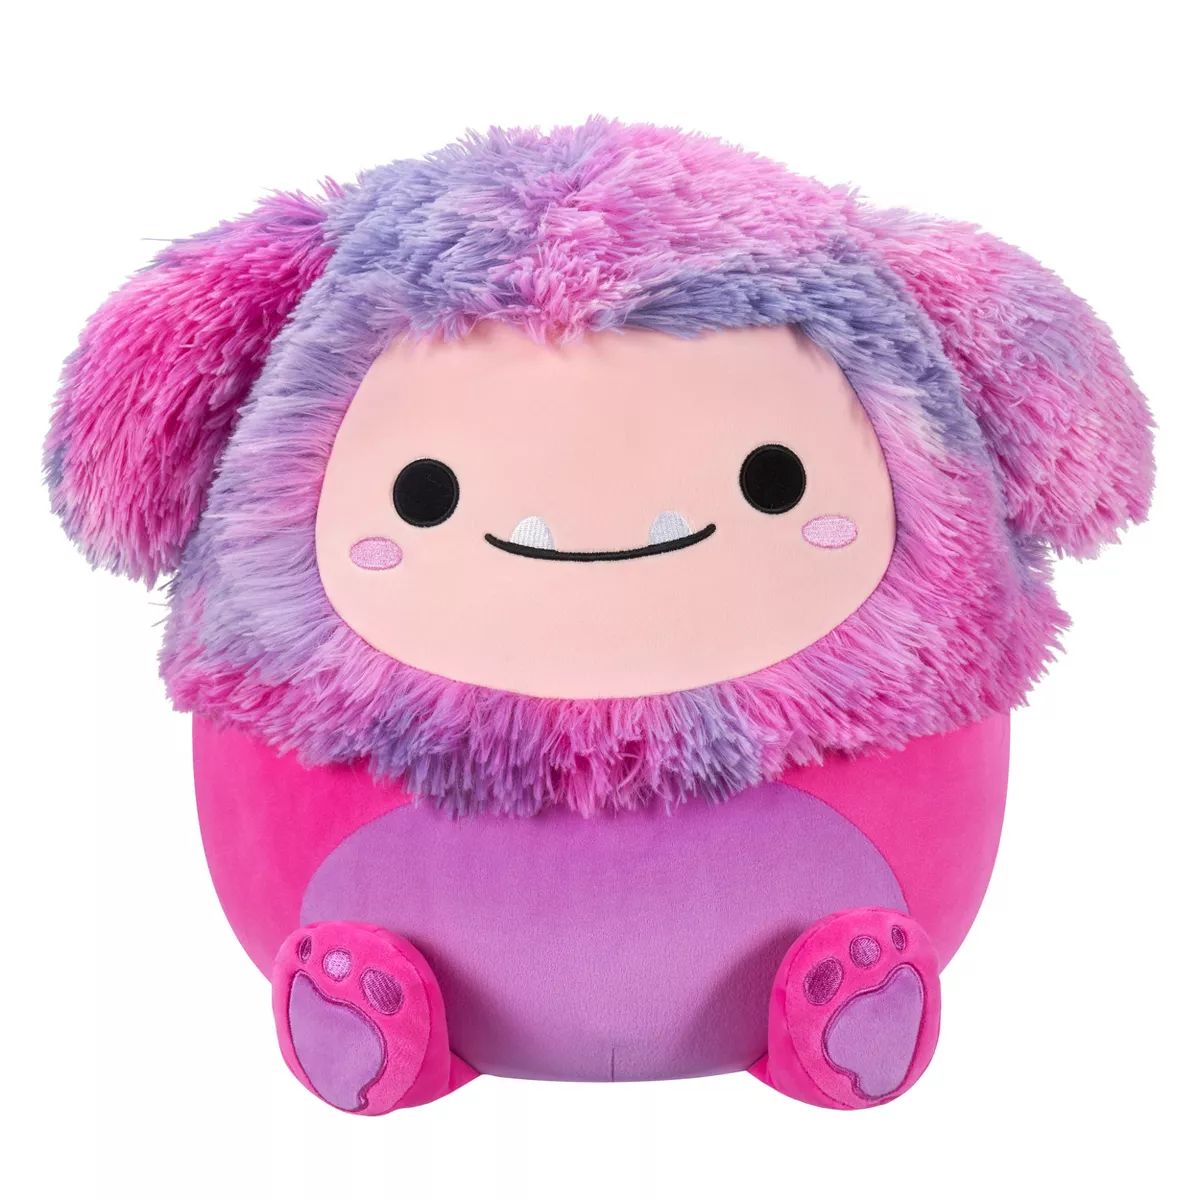 Squishmallows 14" Woxie Magenta Bigfoot with Hair | Target